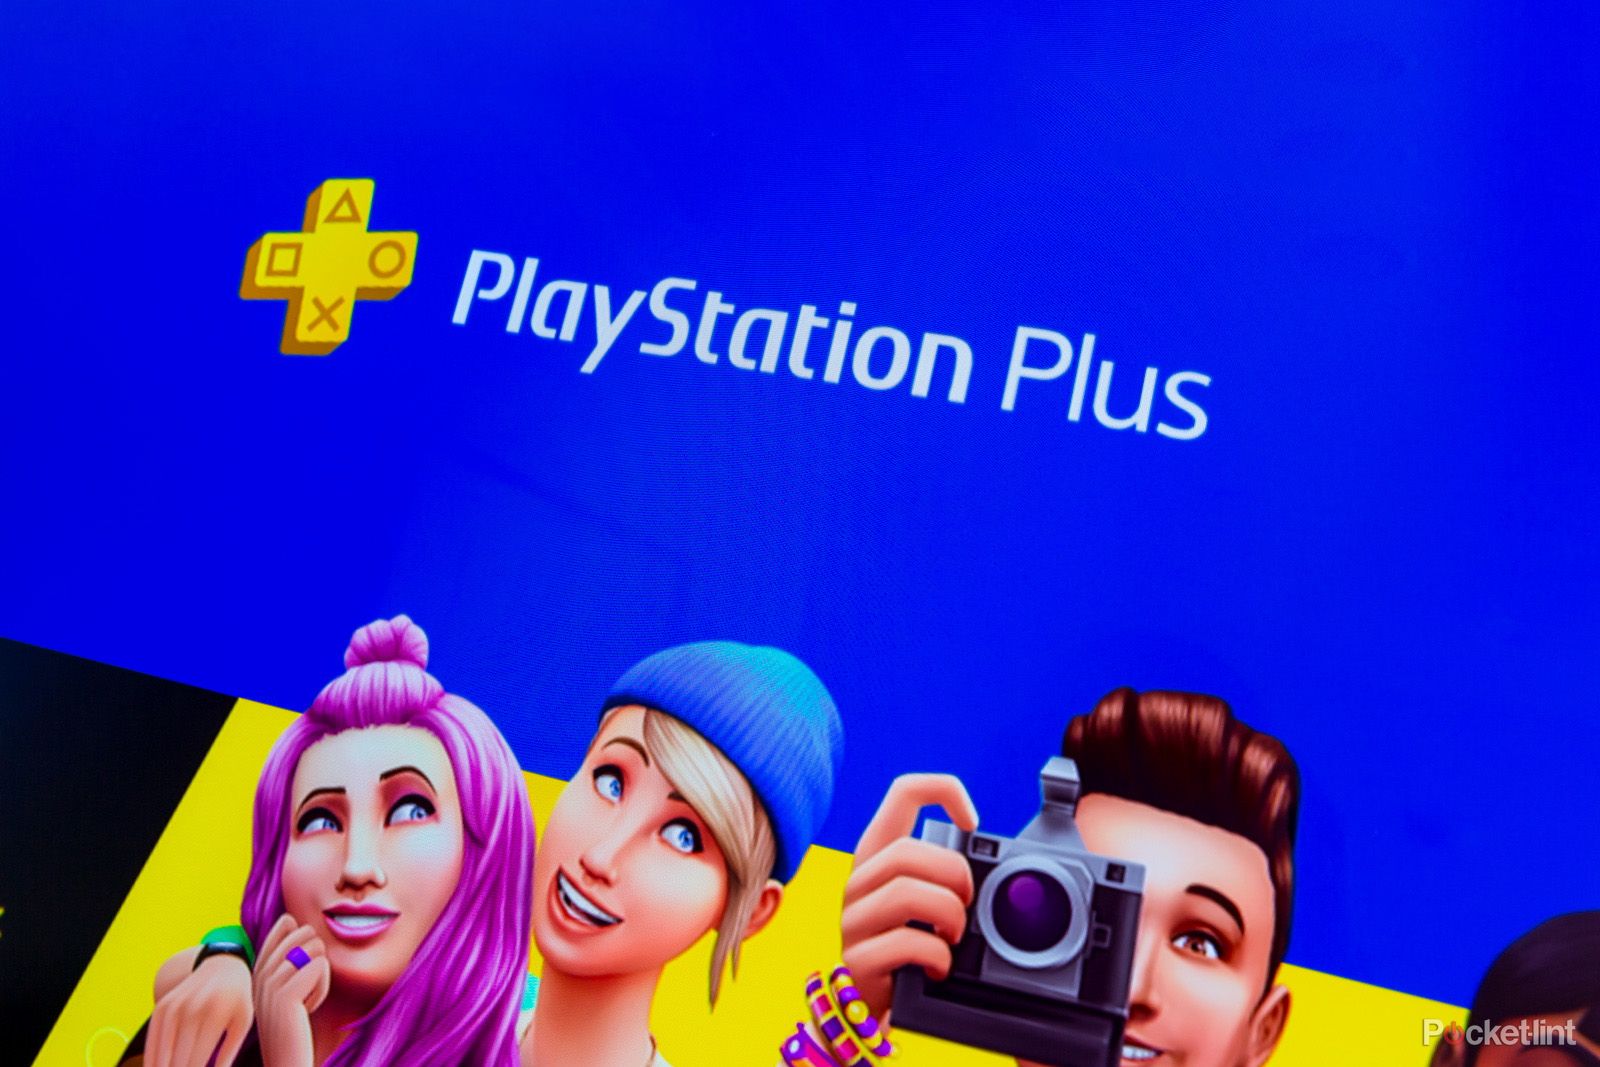 PlayStation Plus Season of Play Includes Free Multiplayer Weekend